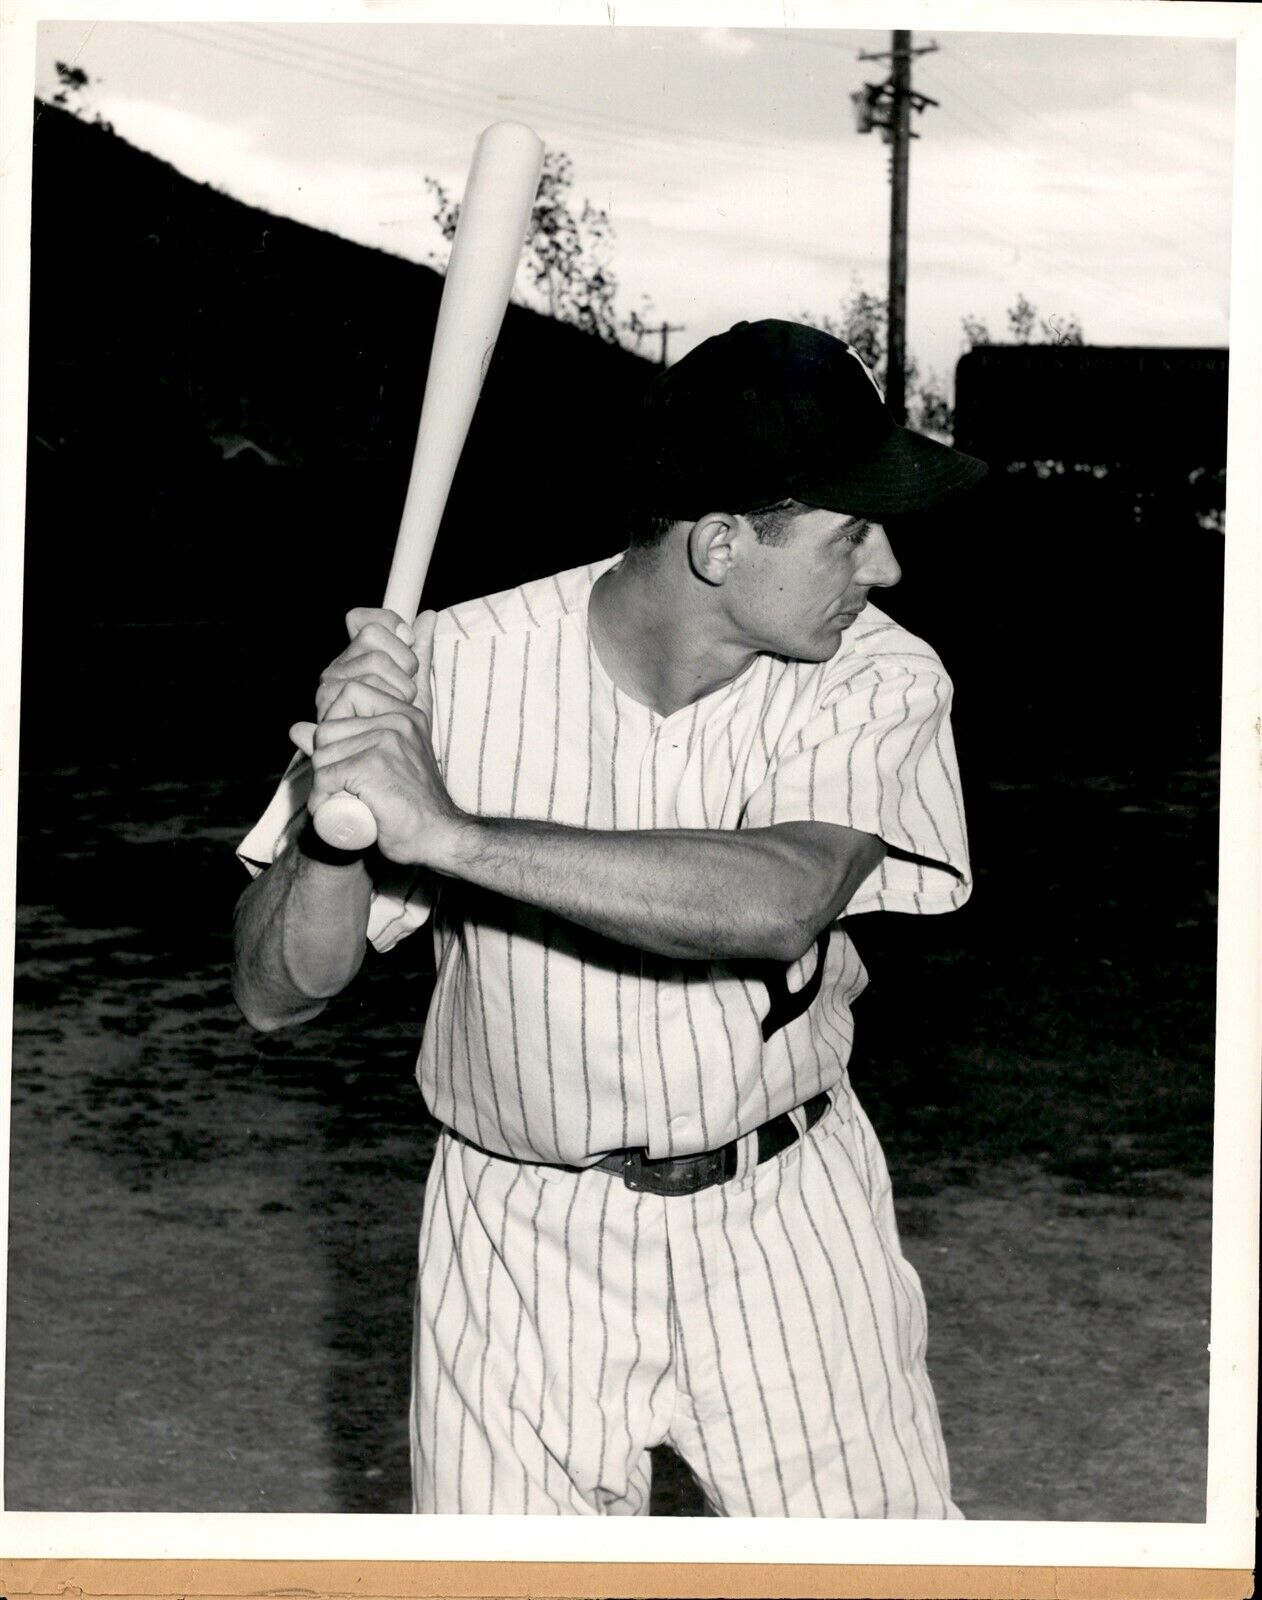 LG915 1950 Orig Photo CHARLIE METRO Outfielder for DETROIT TIGERS Batting Stance